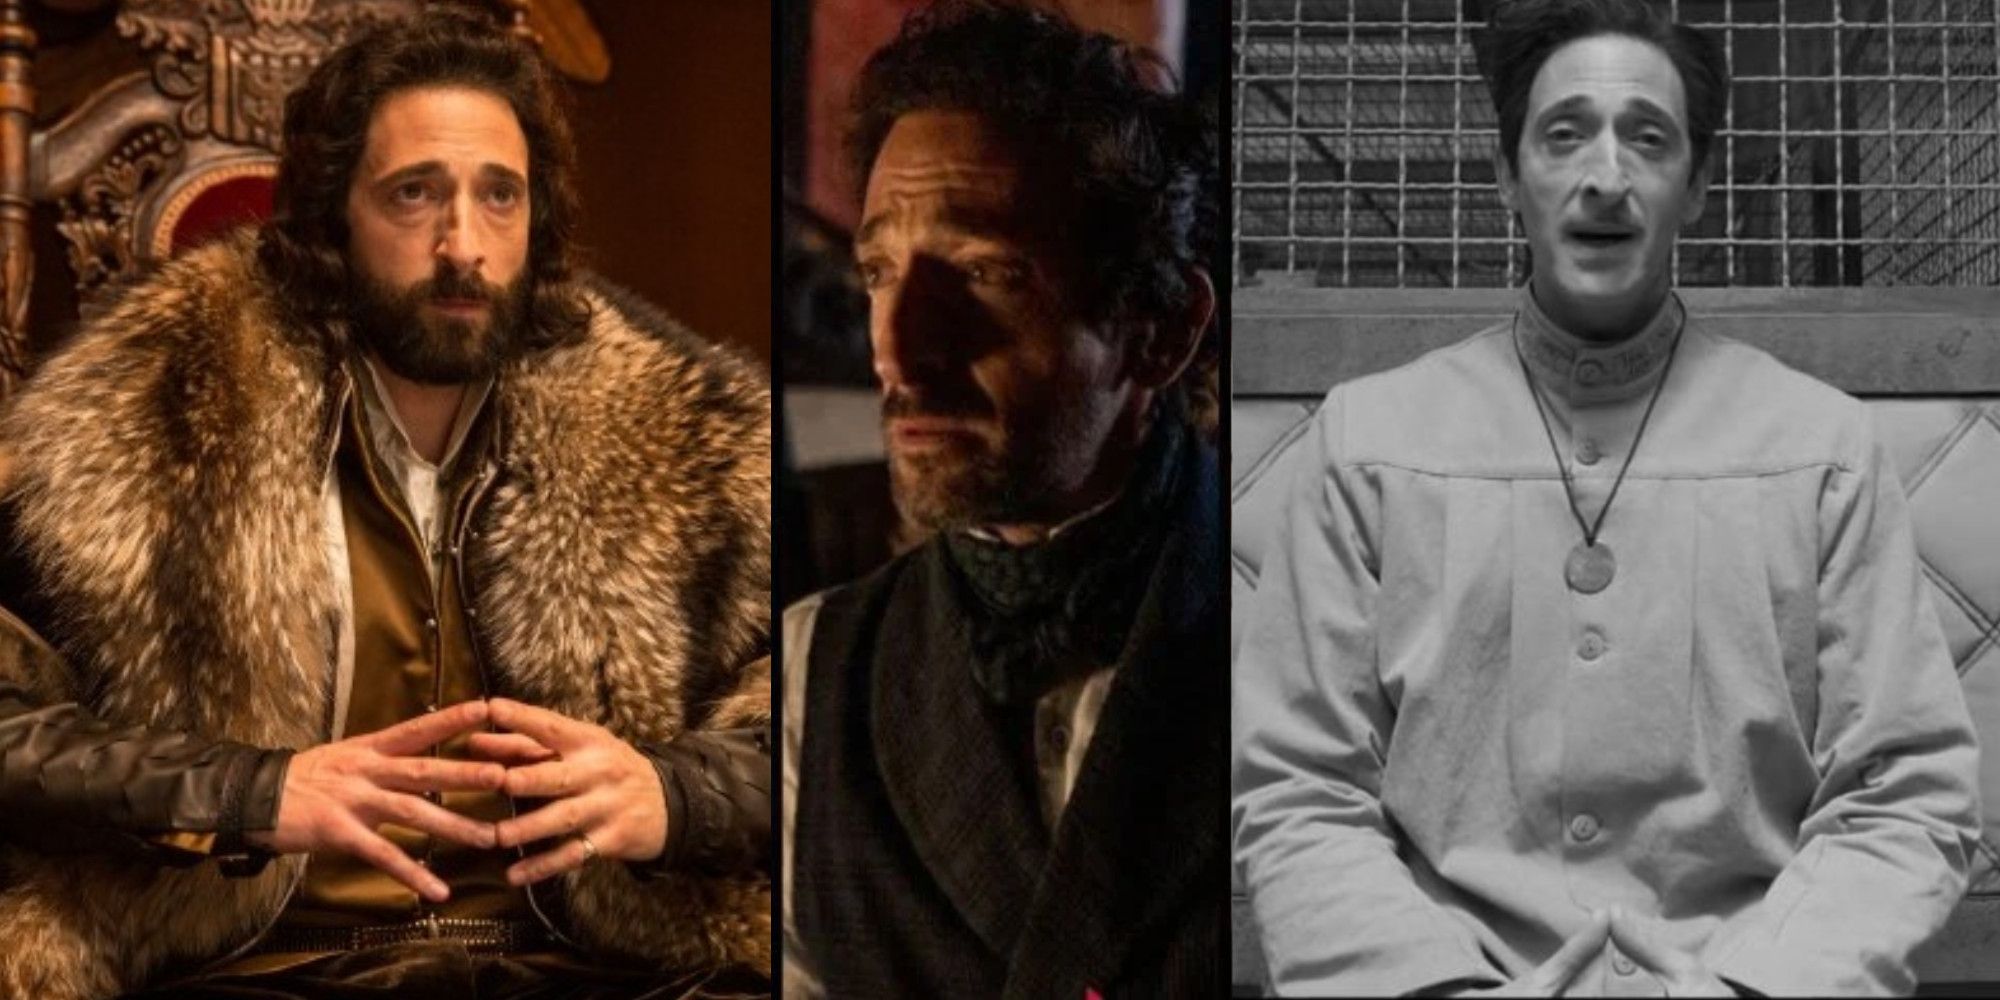 Adrien Brody as Roman Emperor Charles V in Emperor, Captain Charles Boone in Chapelwaite, and Julien Cadazio in The French Dispatch